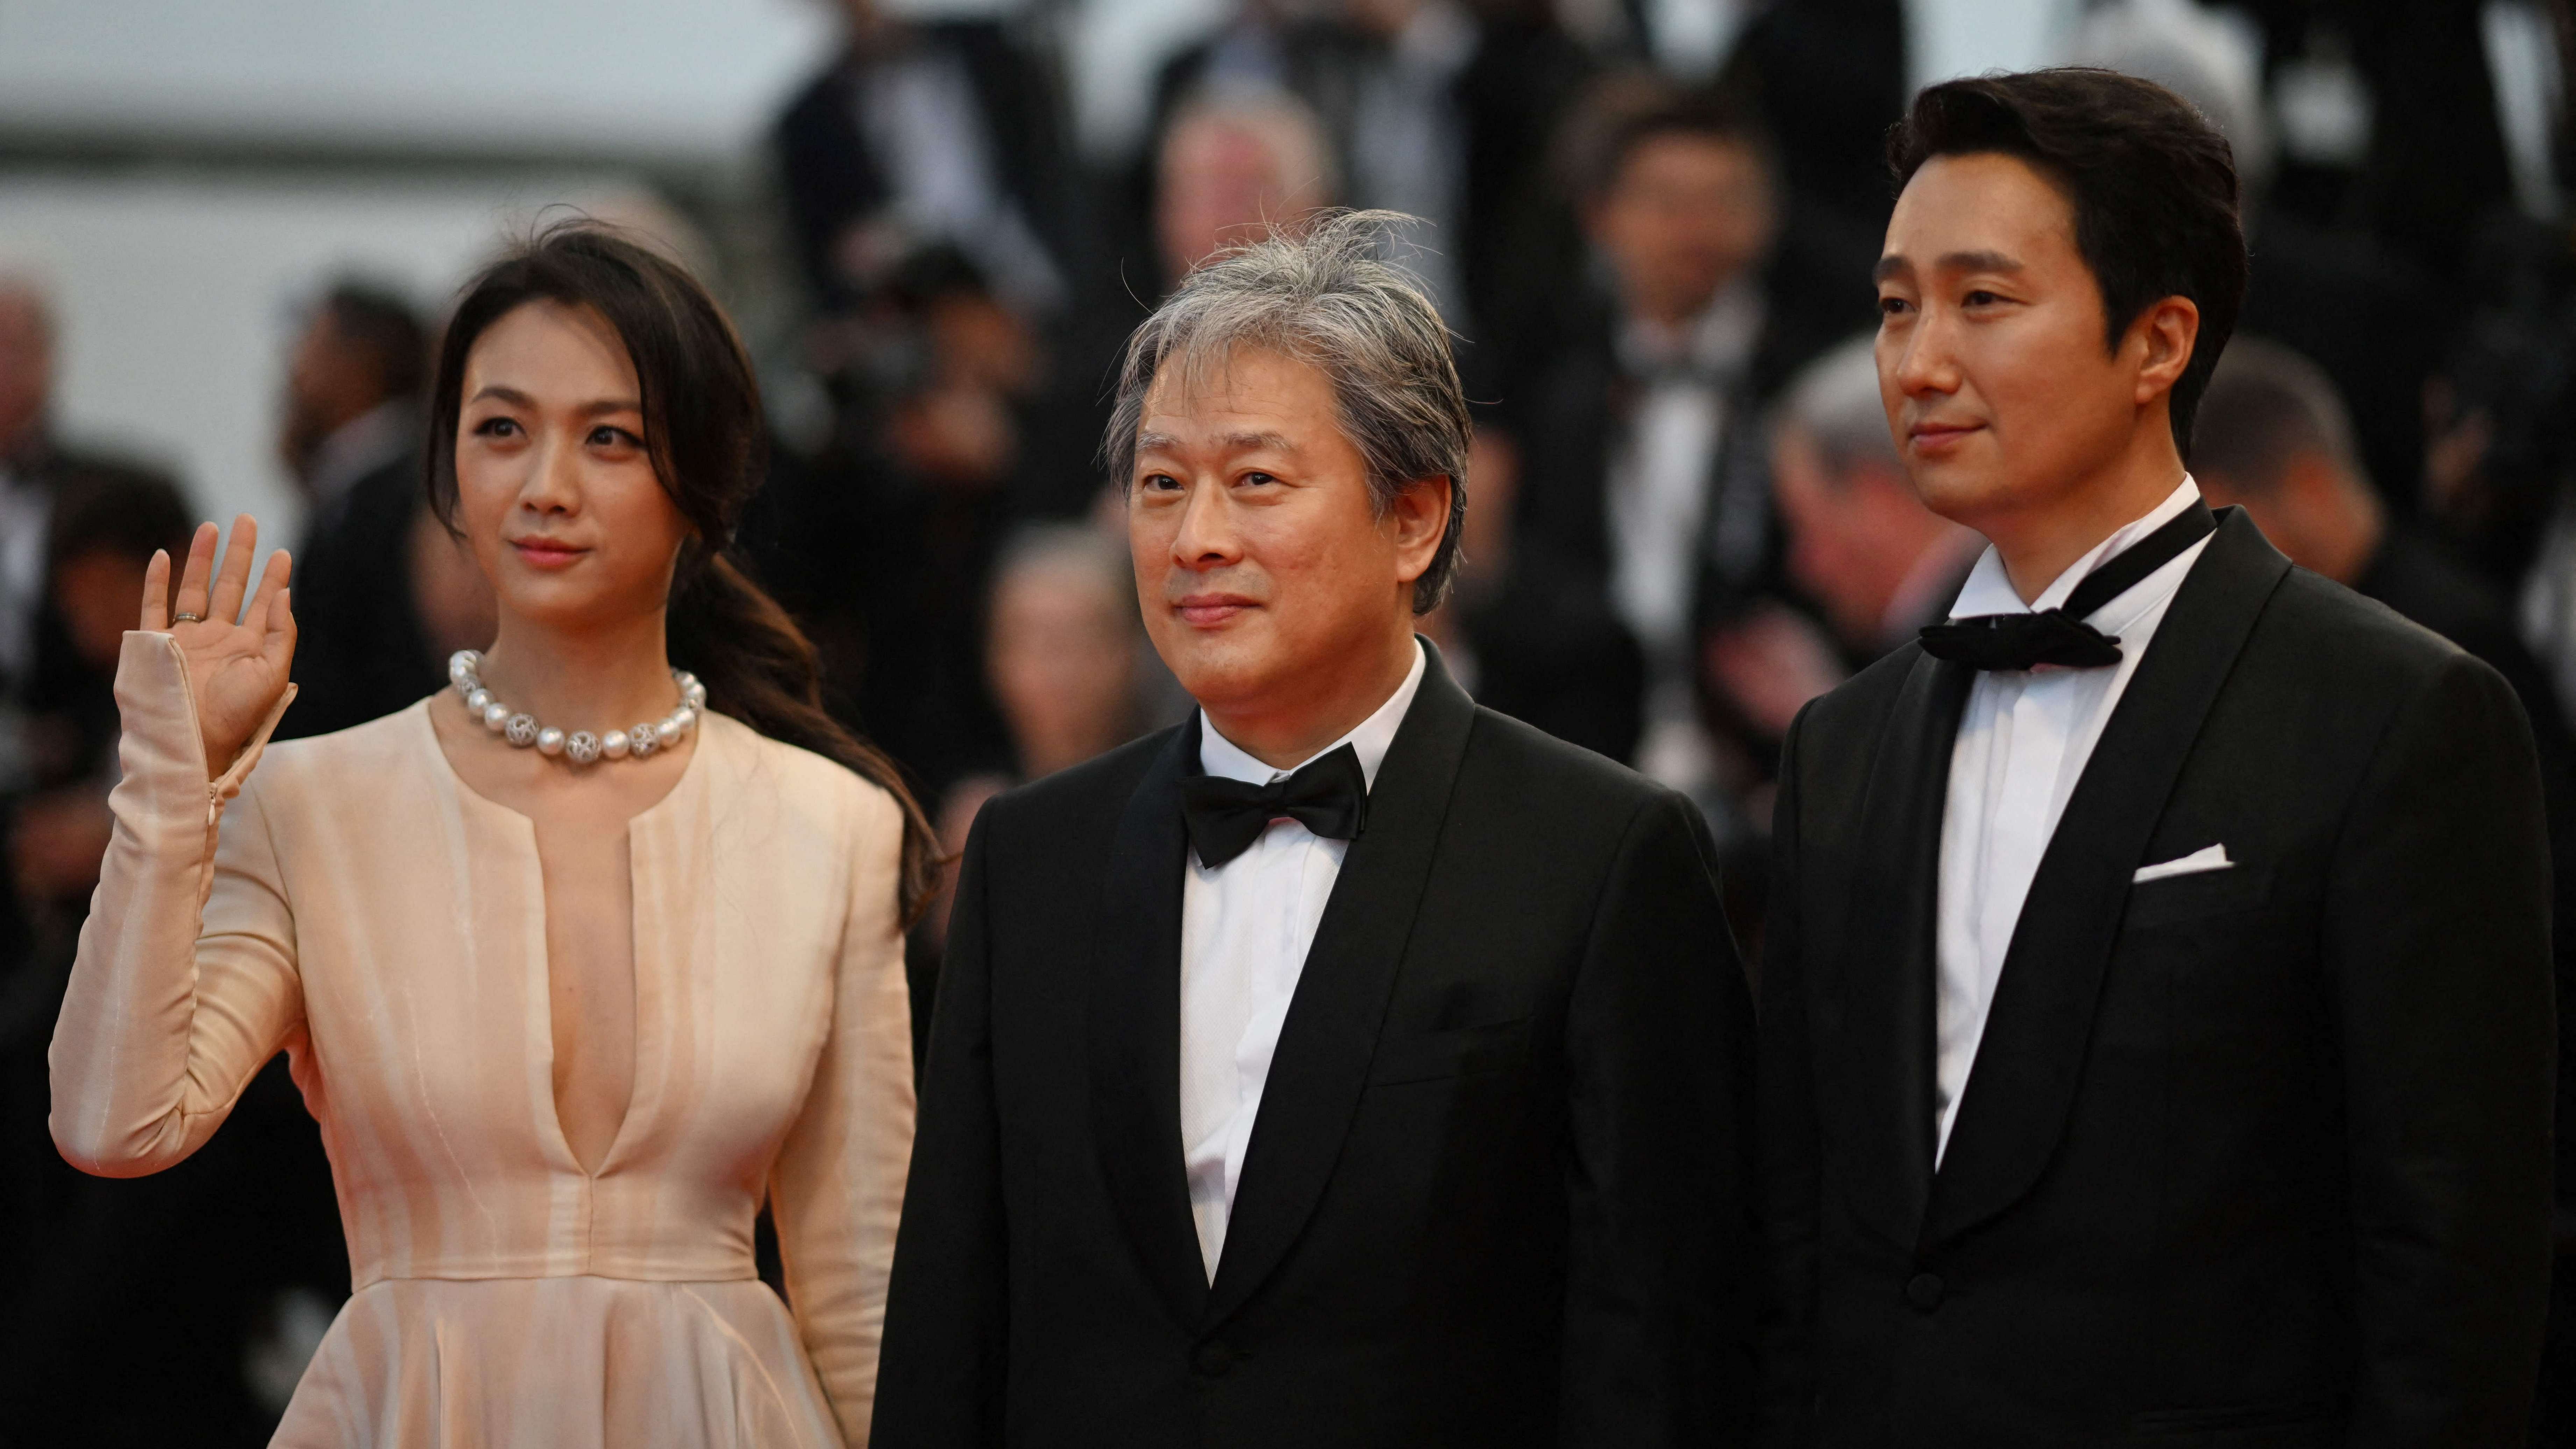 Chinese actress Tang Wei, South Korean producer Park Chan-Wook and South Korean actor Park Hae-Il arrive for the screening of the film "Decision to Leave (Heojil Kyolshim)" during the 75th edition of the Cannes Film Festival. Credit: AFP Photo